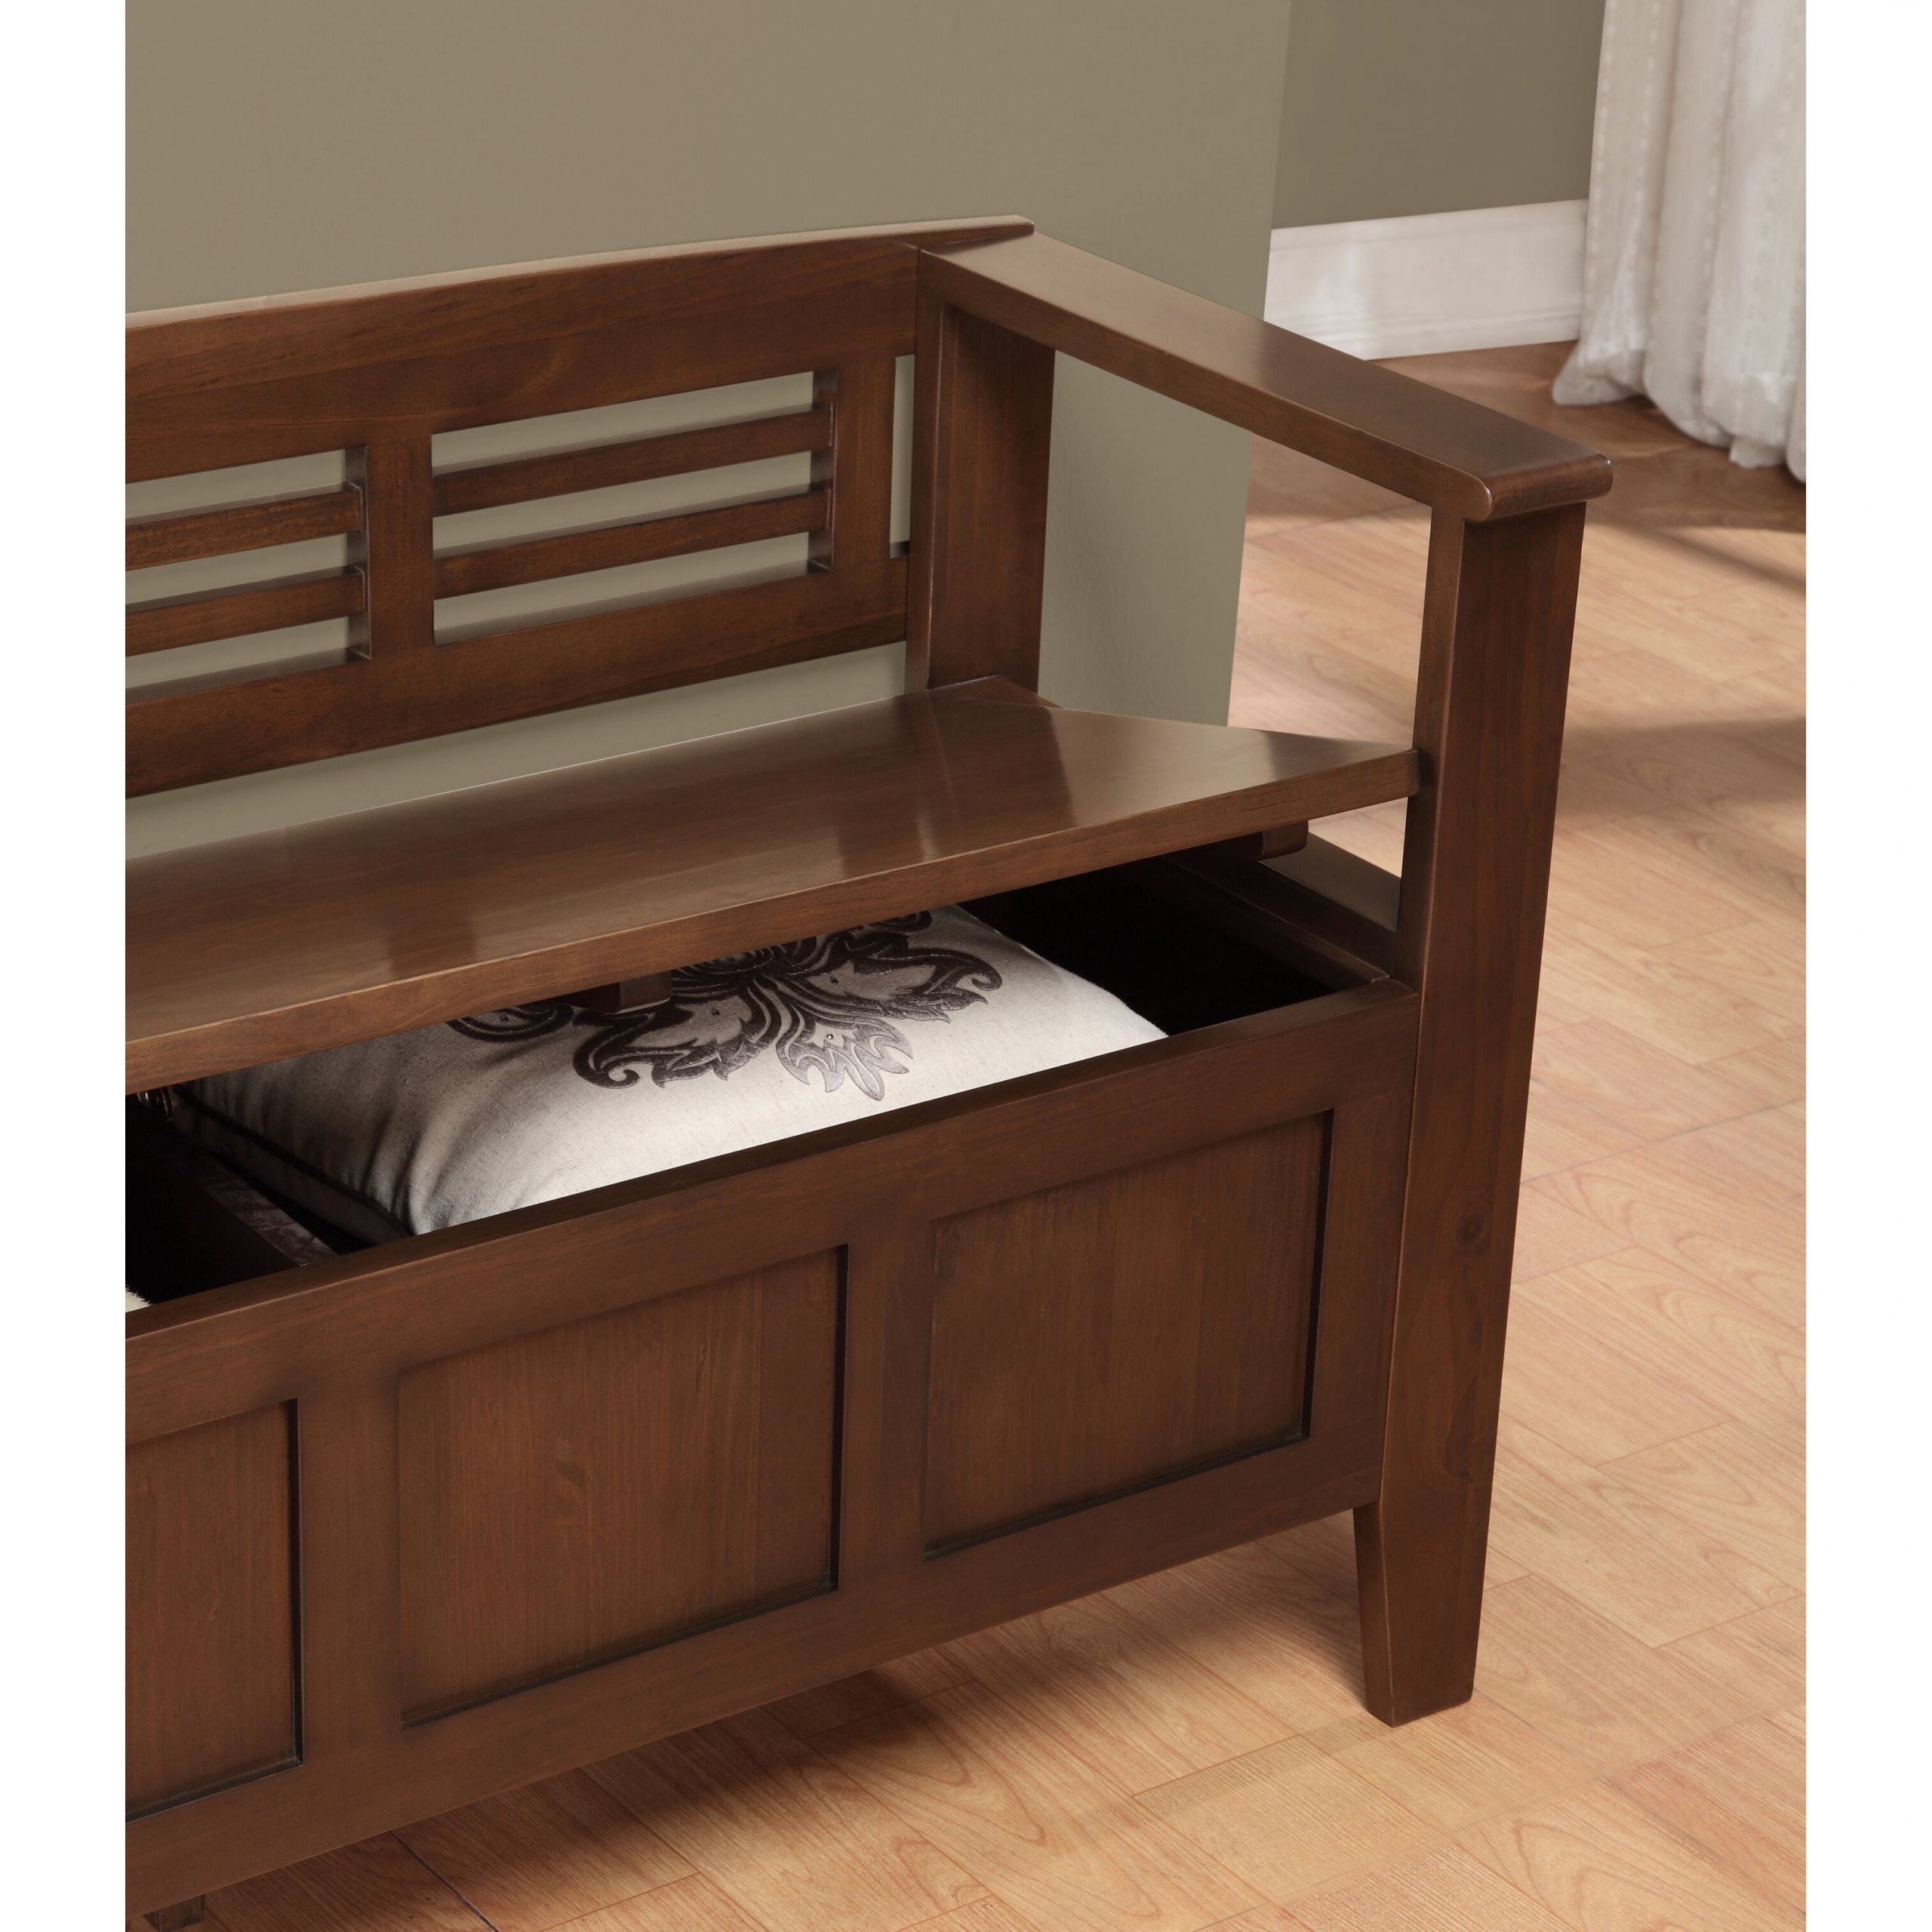 Bench For Entryway With Storage
 Simpli Home Adams Wood Storage Entryway Bench & Reviews